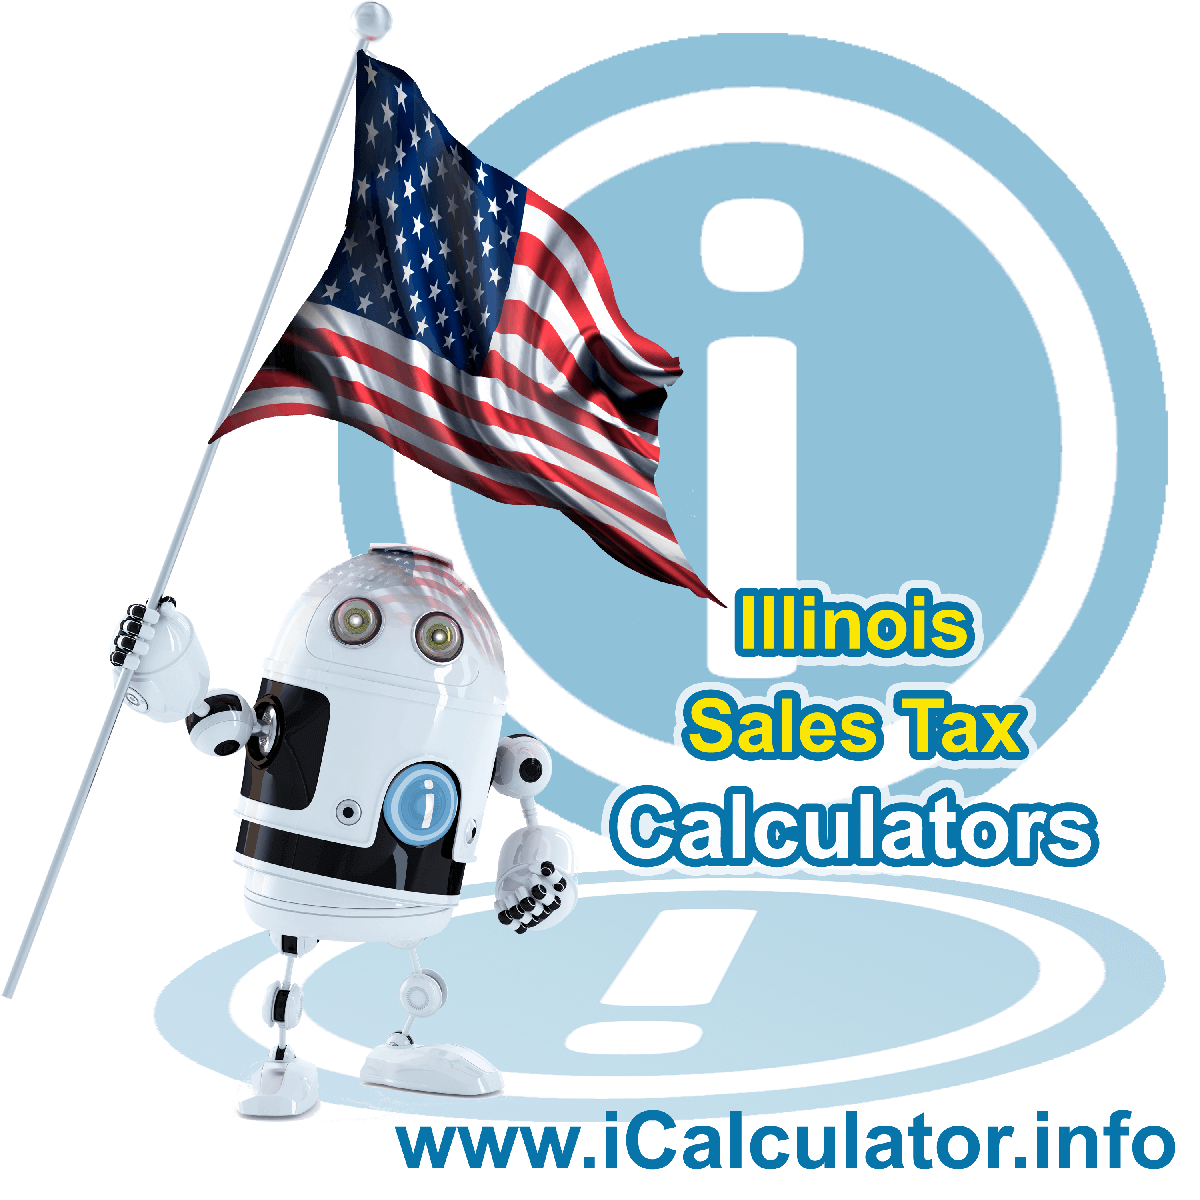 Normal Sales Rates: This image illustrates a calculator robot calculating Normal sales tax manually using the Normal Sales Tax Formula. You can use this information to calculate Normal Sales Tax manually or use the Normal Sales Tax Calculator to calculate sales tax online.